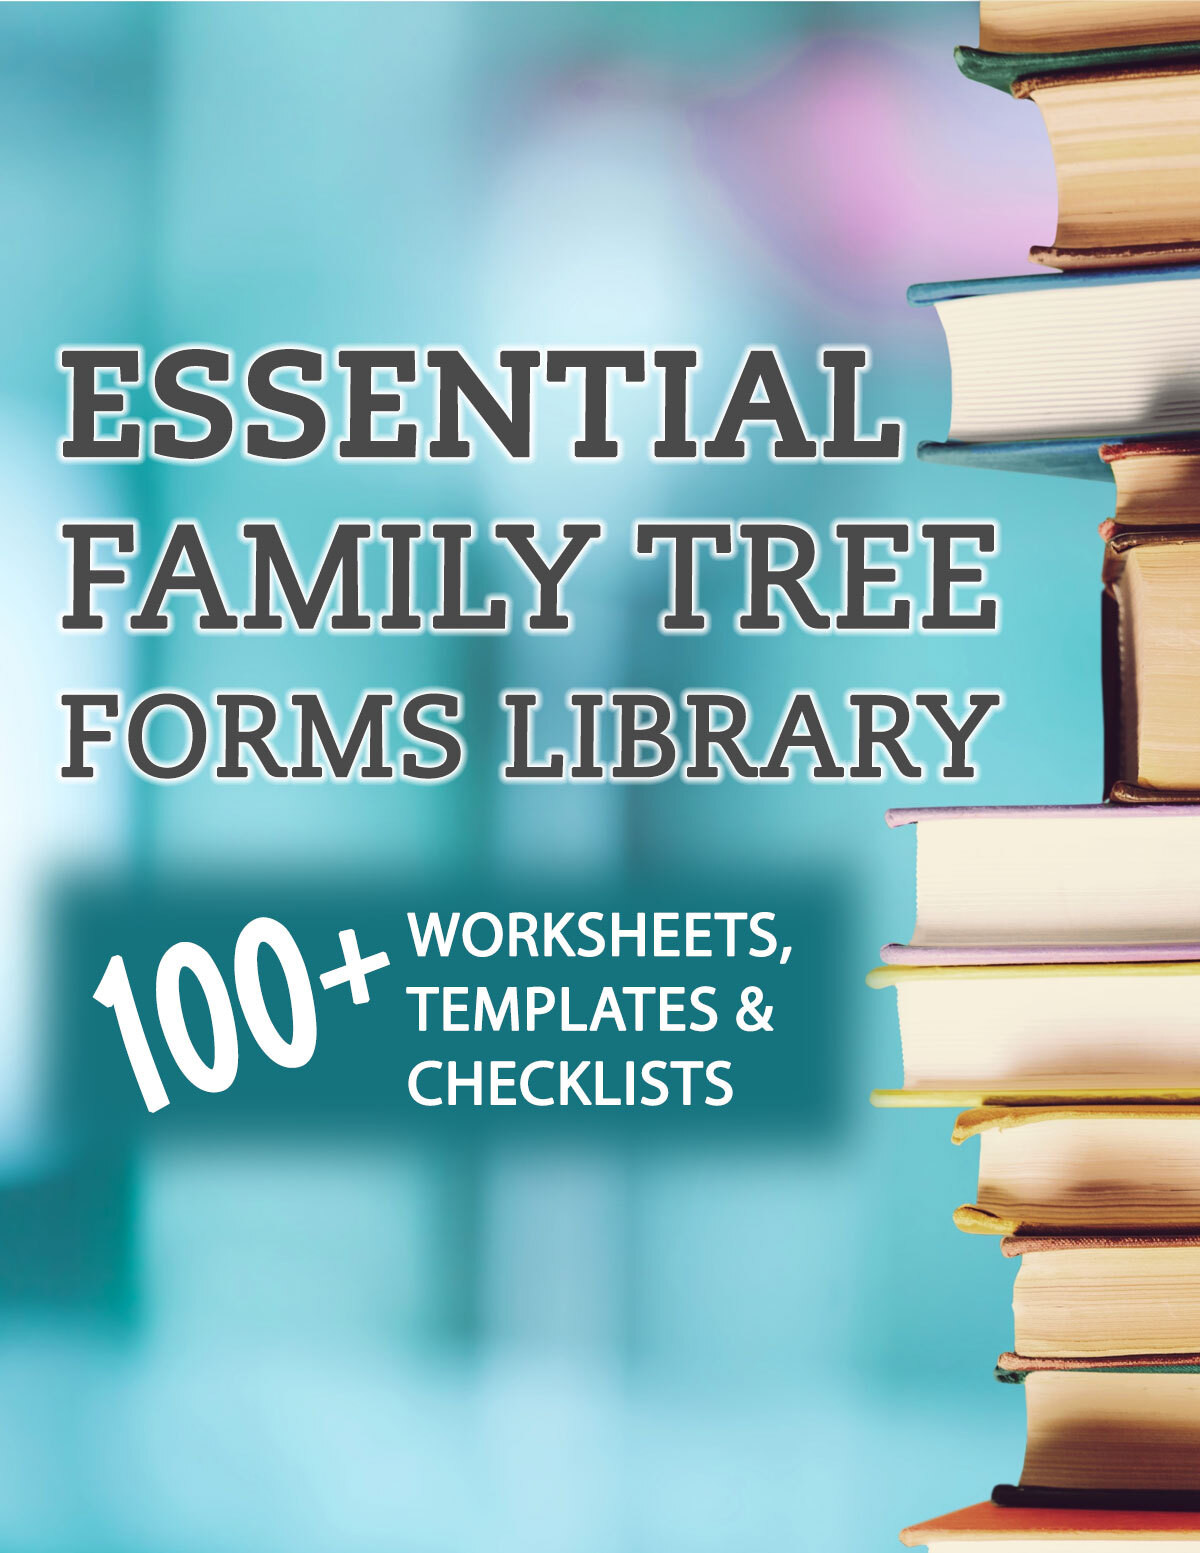 Genealogy Organizer: Family Geneology Organizer Books: Family Tree  Recording Book, With Fillable Family Tree, Charts, And Forms To Record The  Family